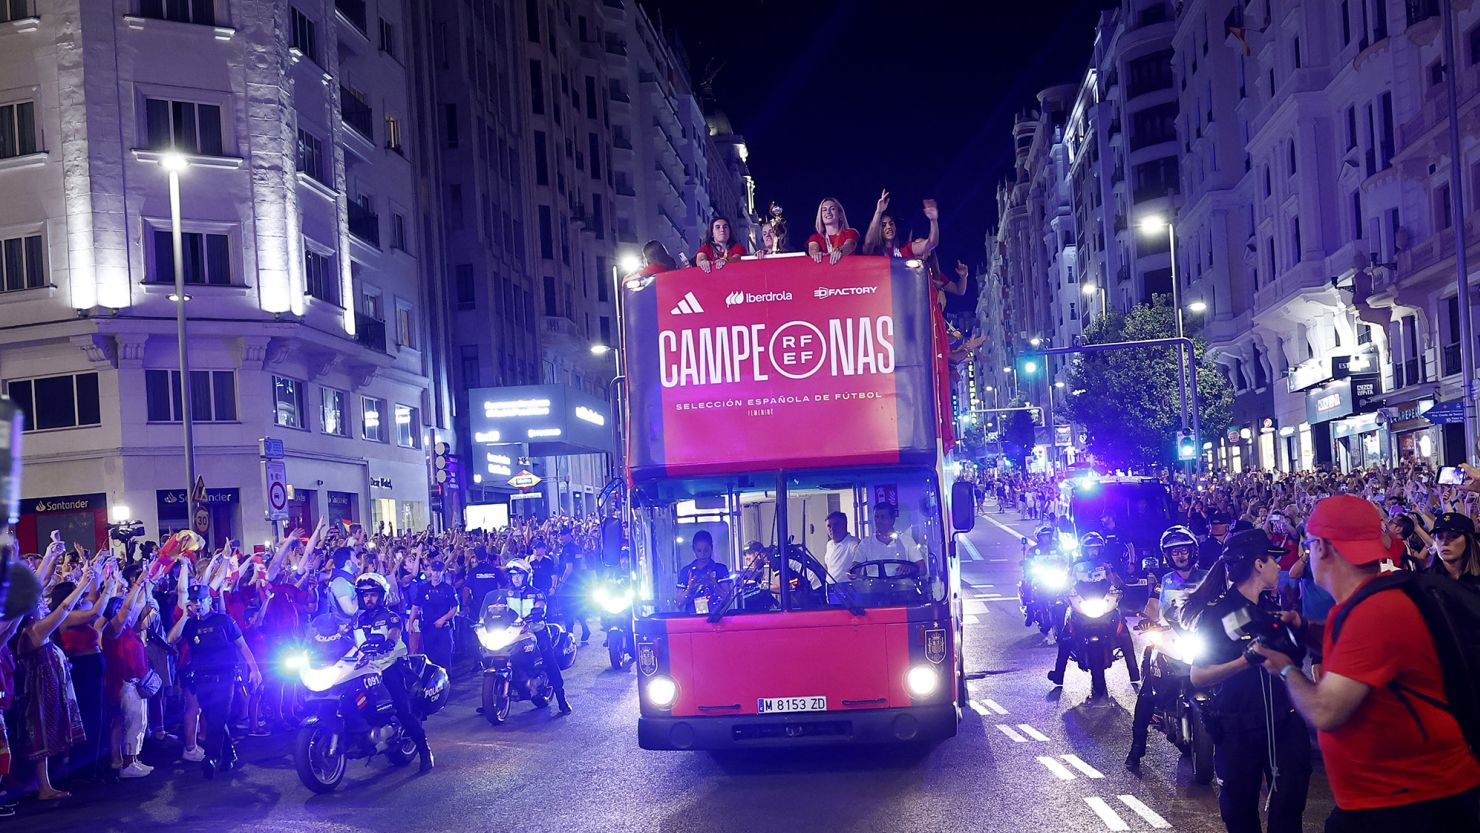 An open-top bus carries Spain's conquering heroes through the streets of Madrid.